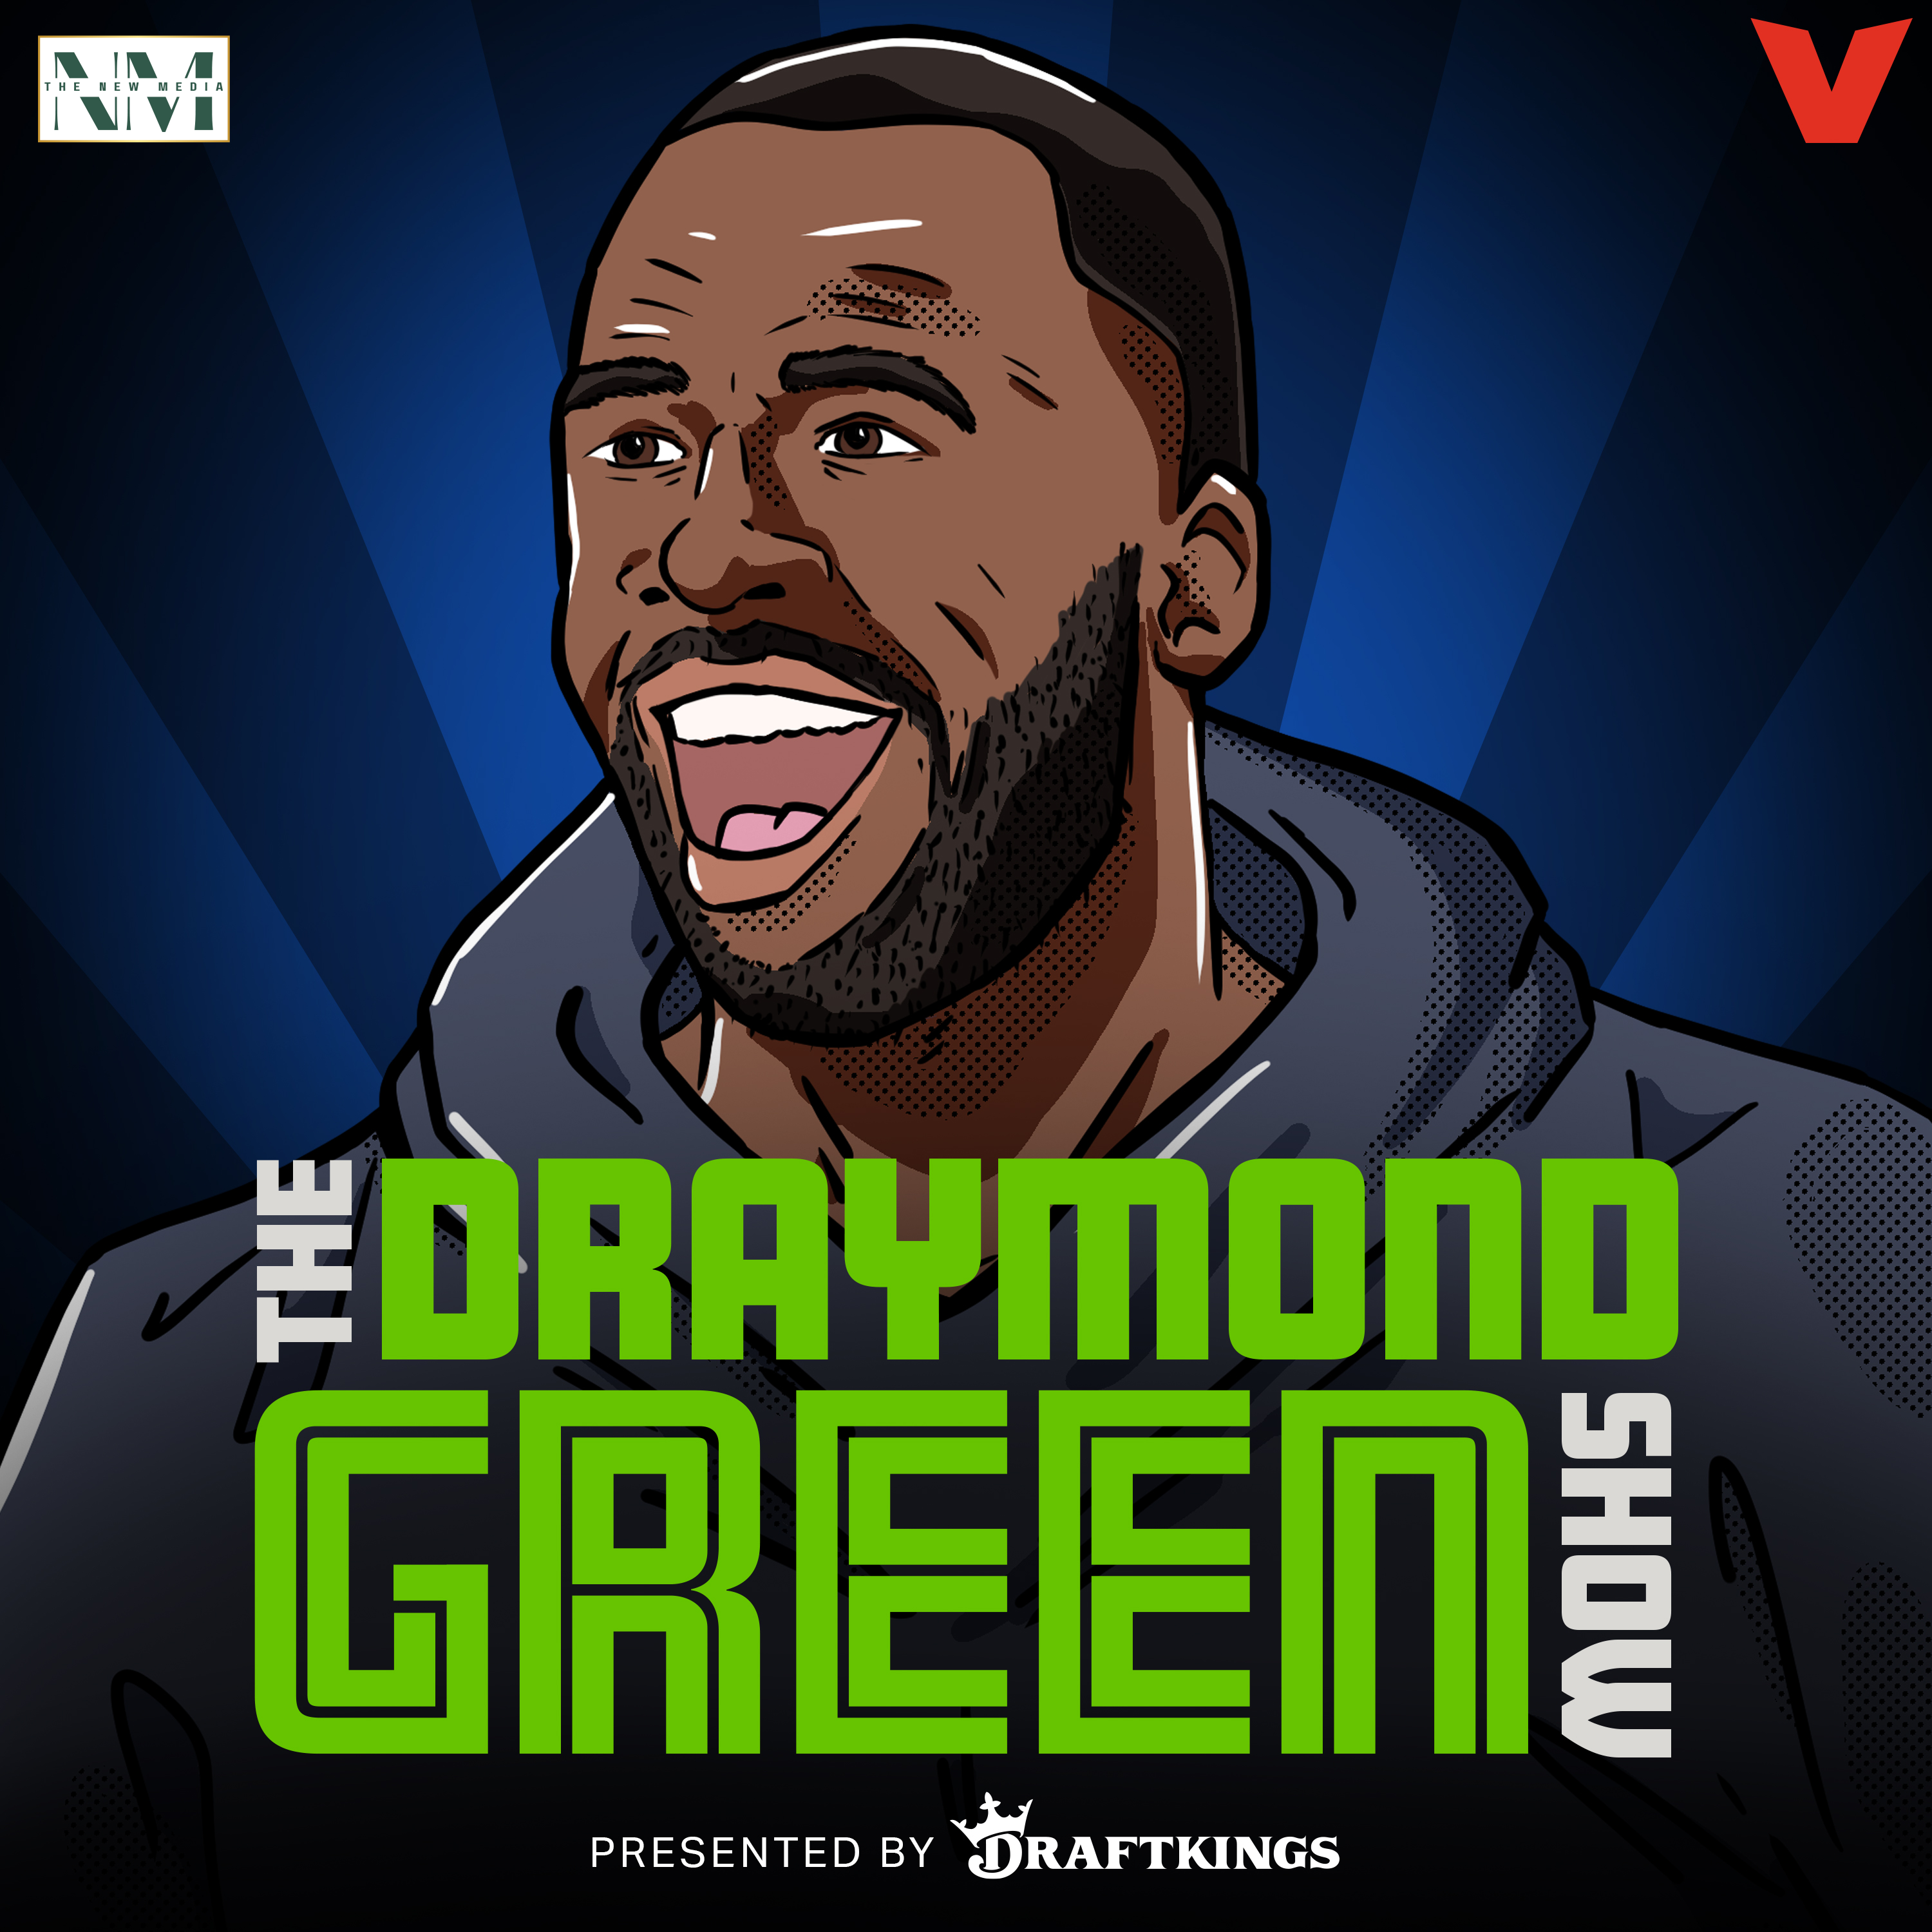 The Draymond Green Show podcast show image